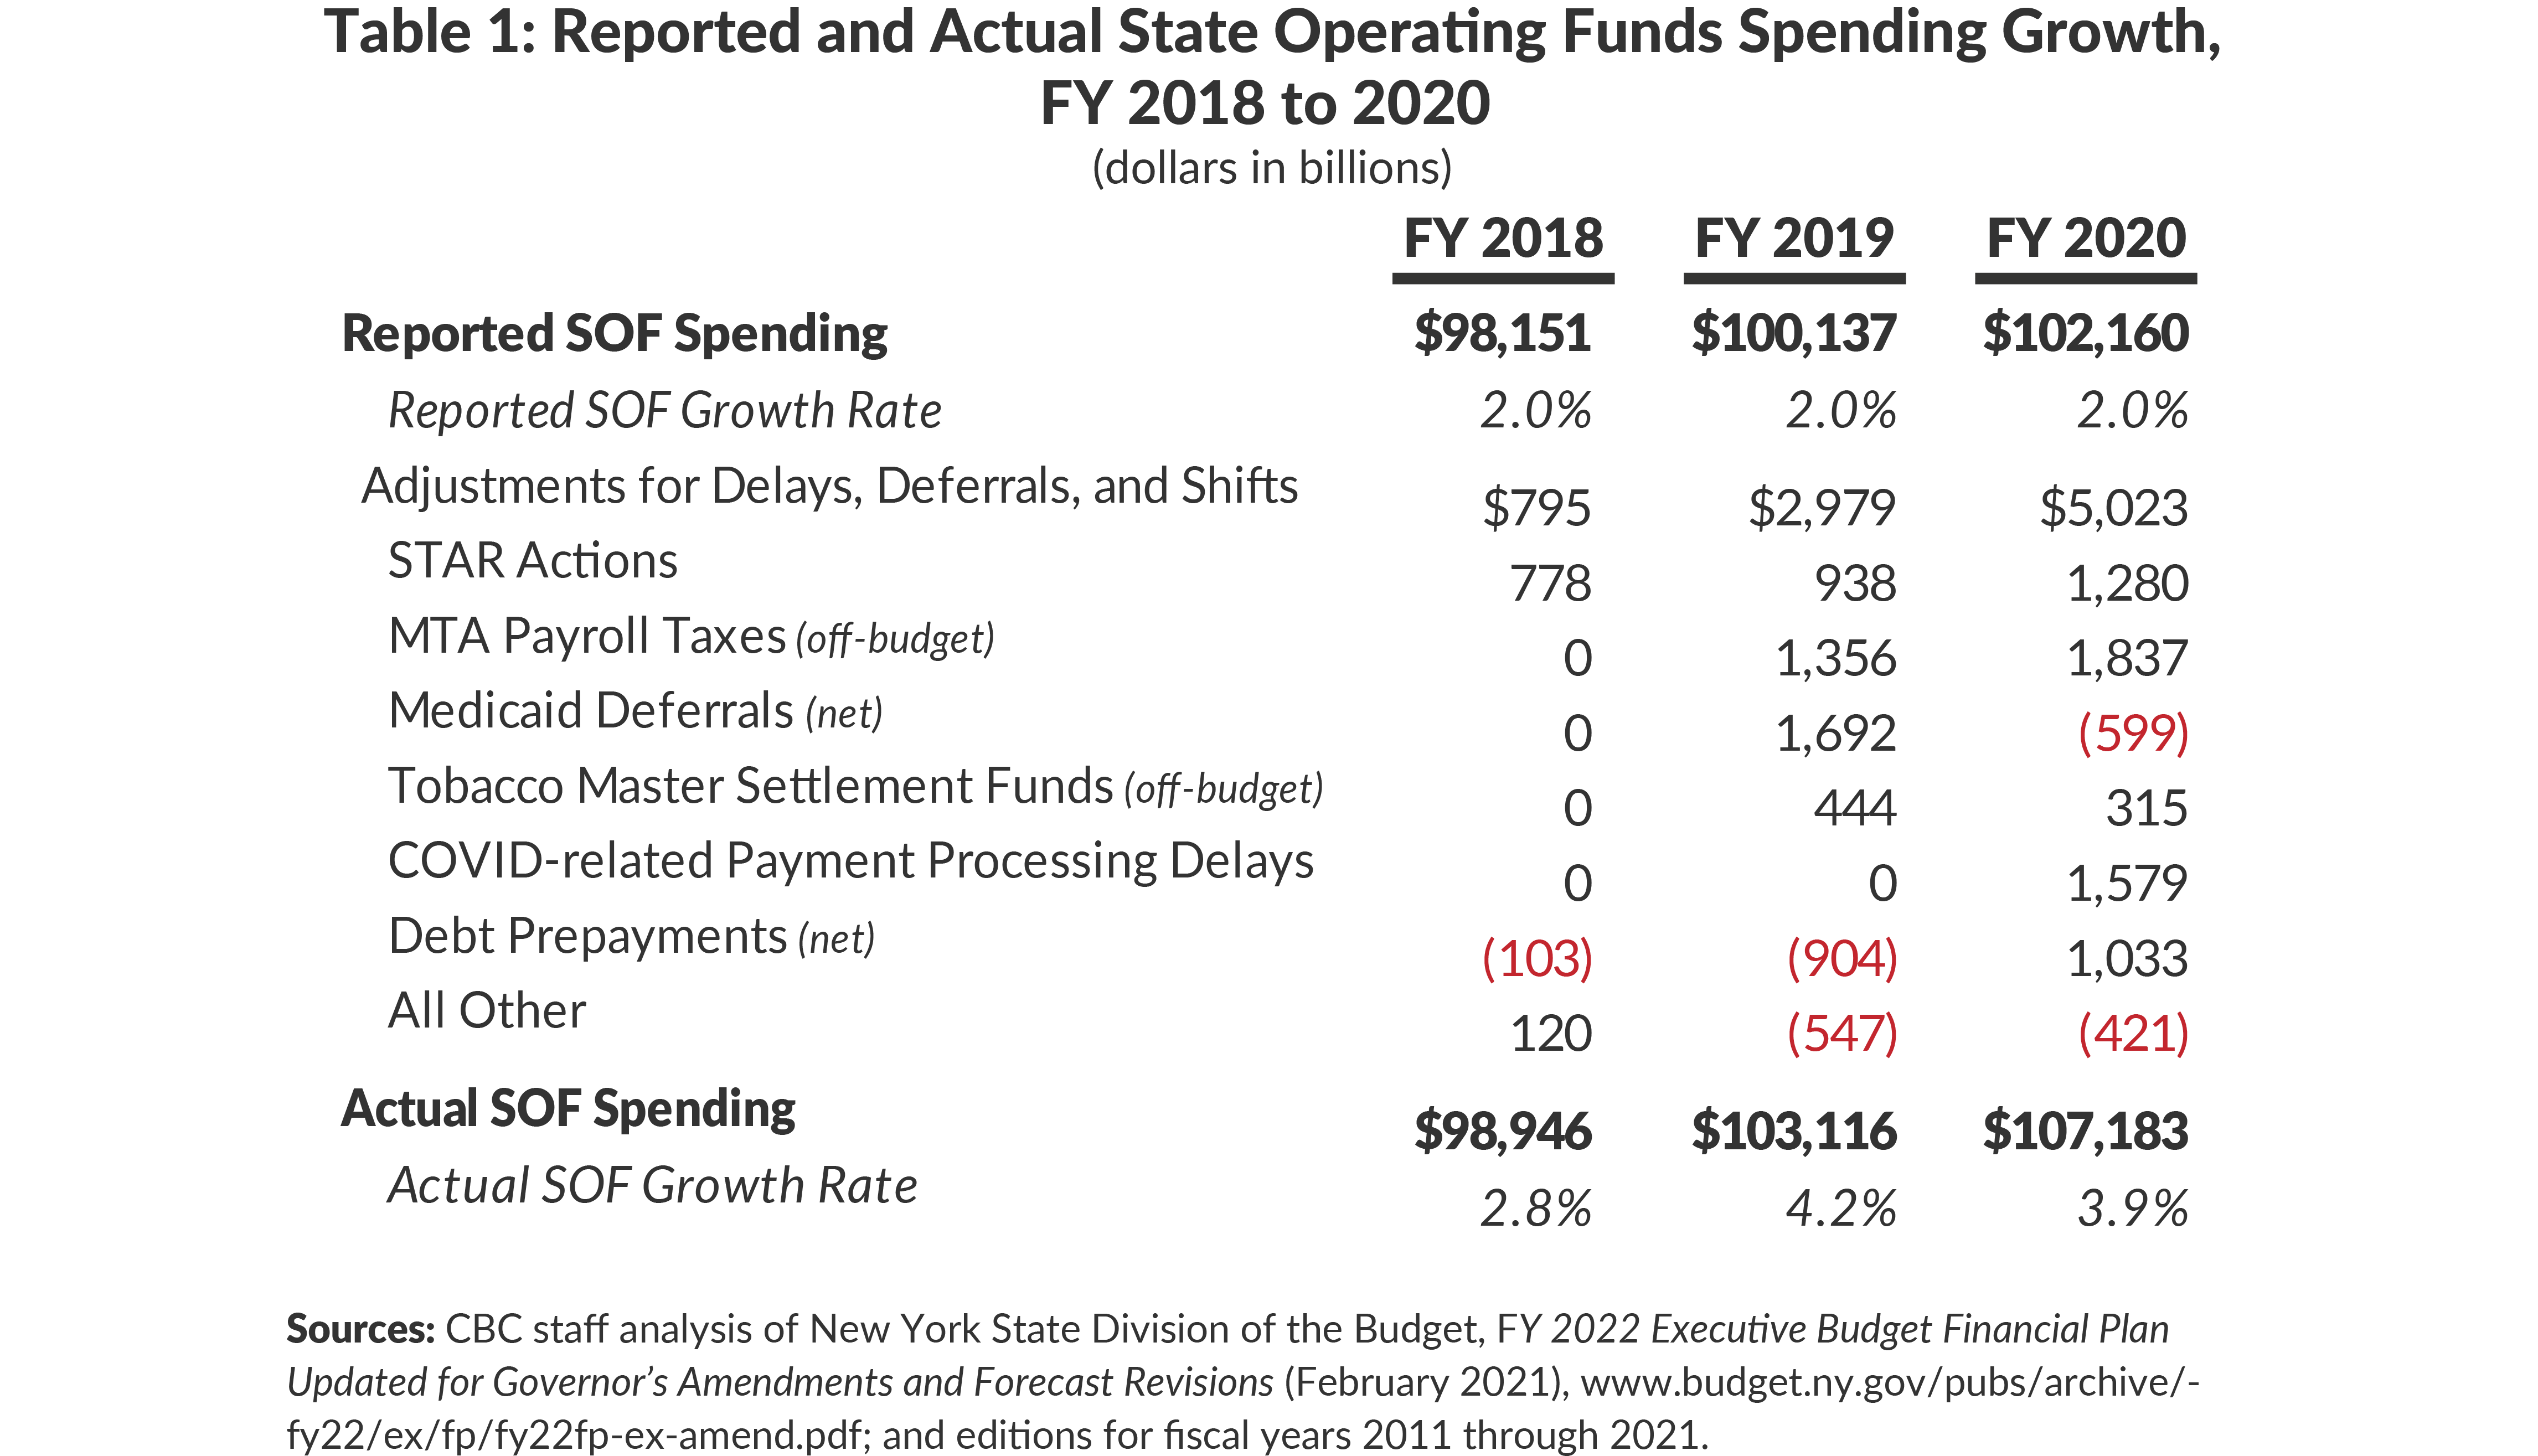 Table 1: Reported and Actual State Operating Funds Spending Growth, Fiscal Years 2018 to 2020